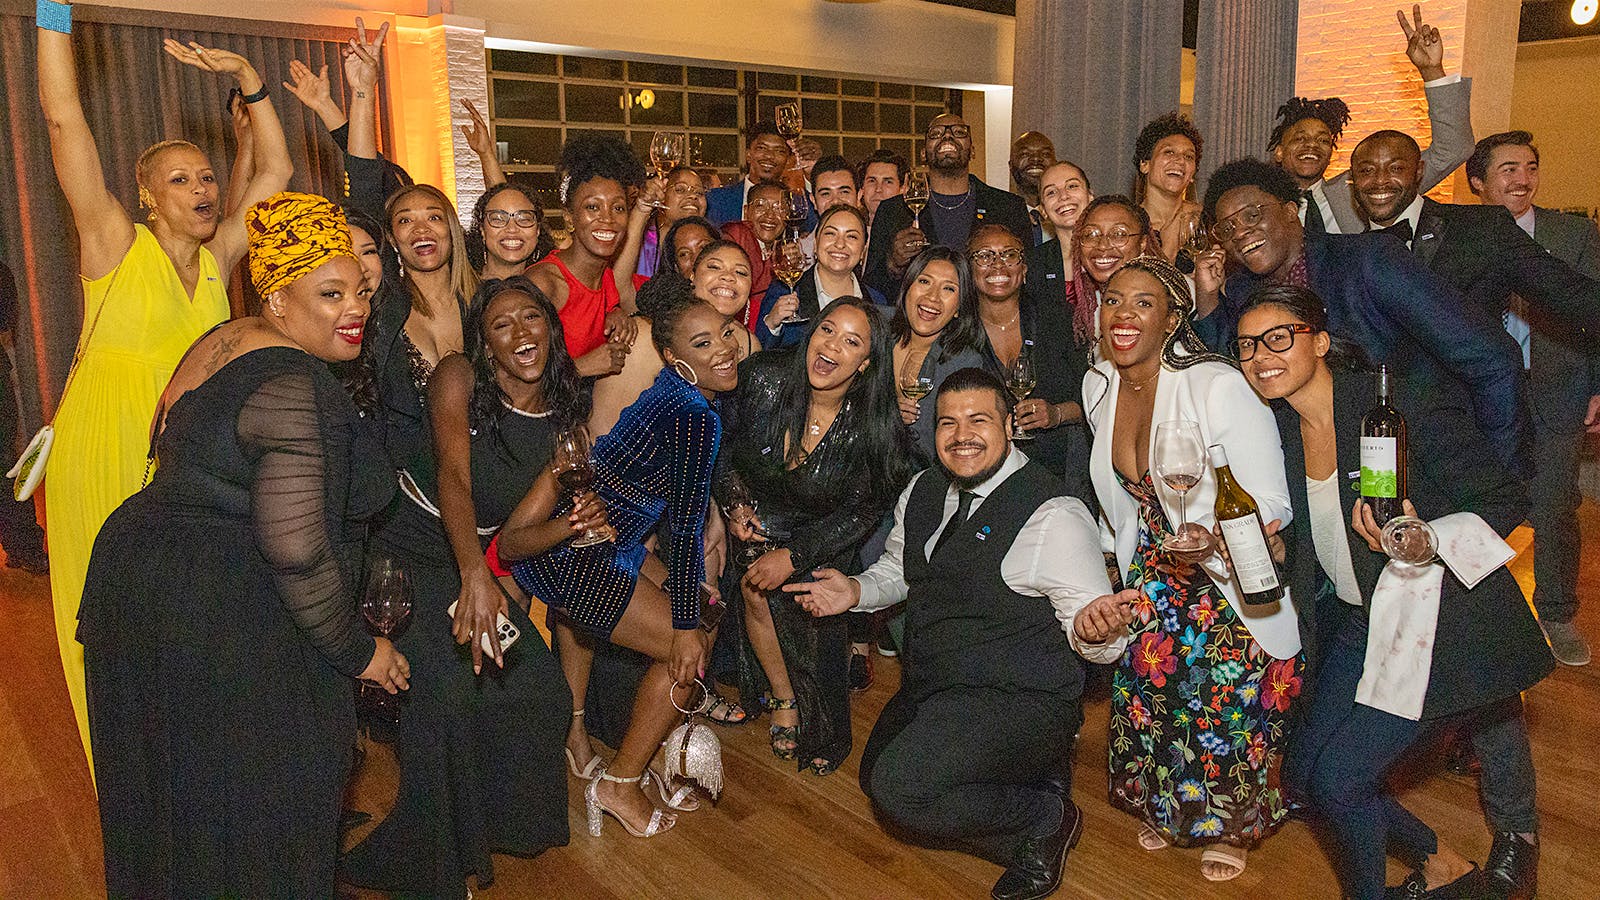 Roots Fund Auction Raises over $400K for Wine Industry Diversity Efforts